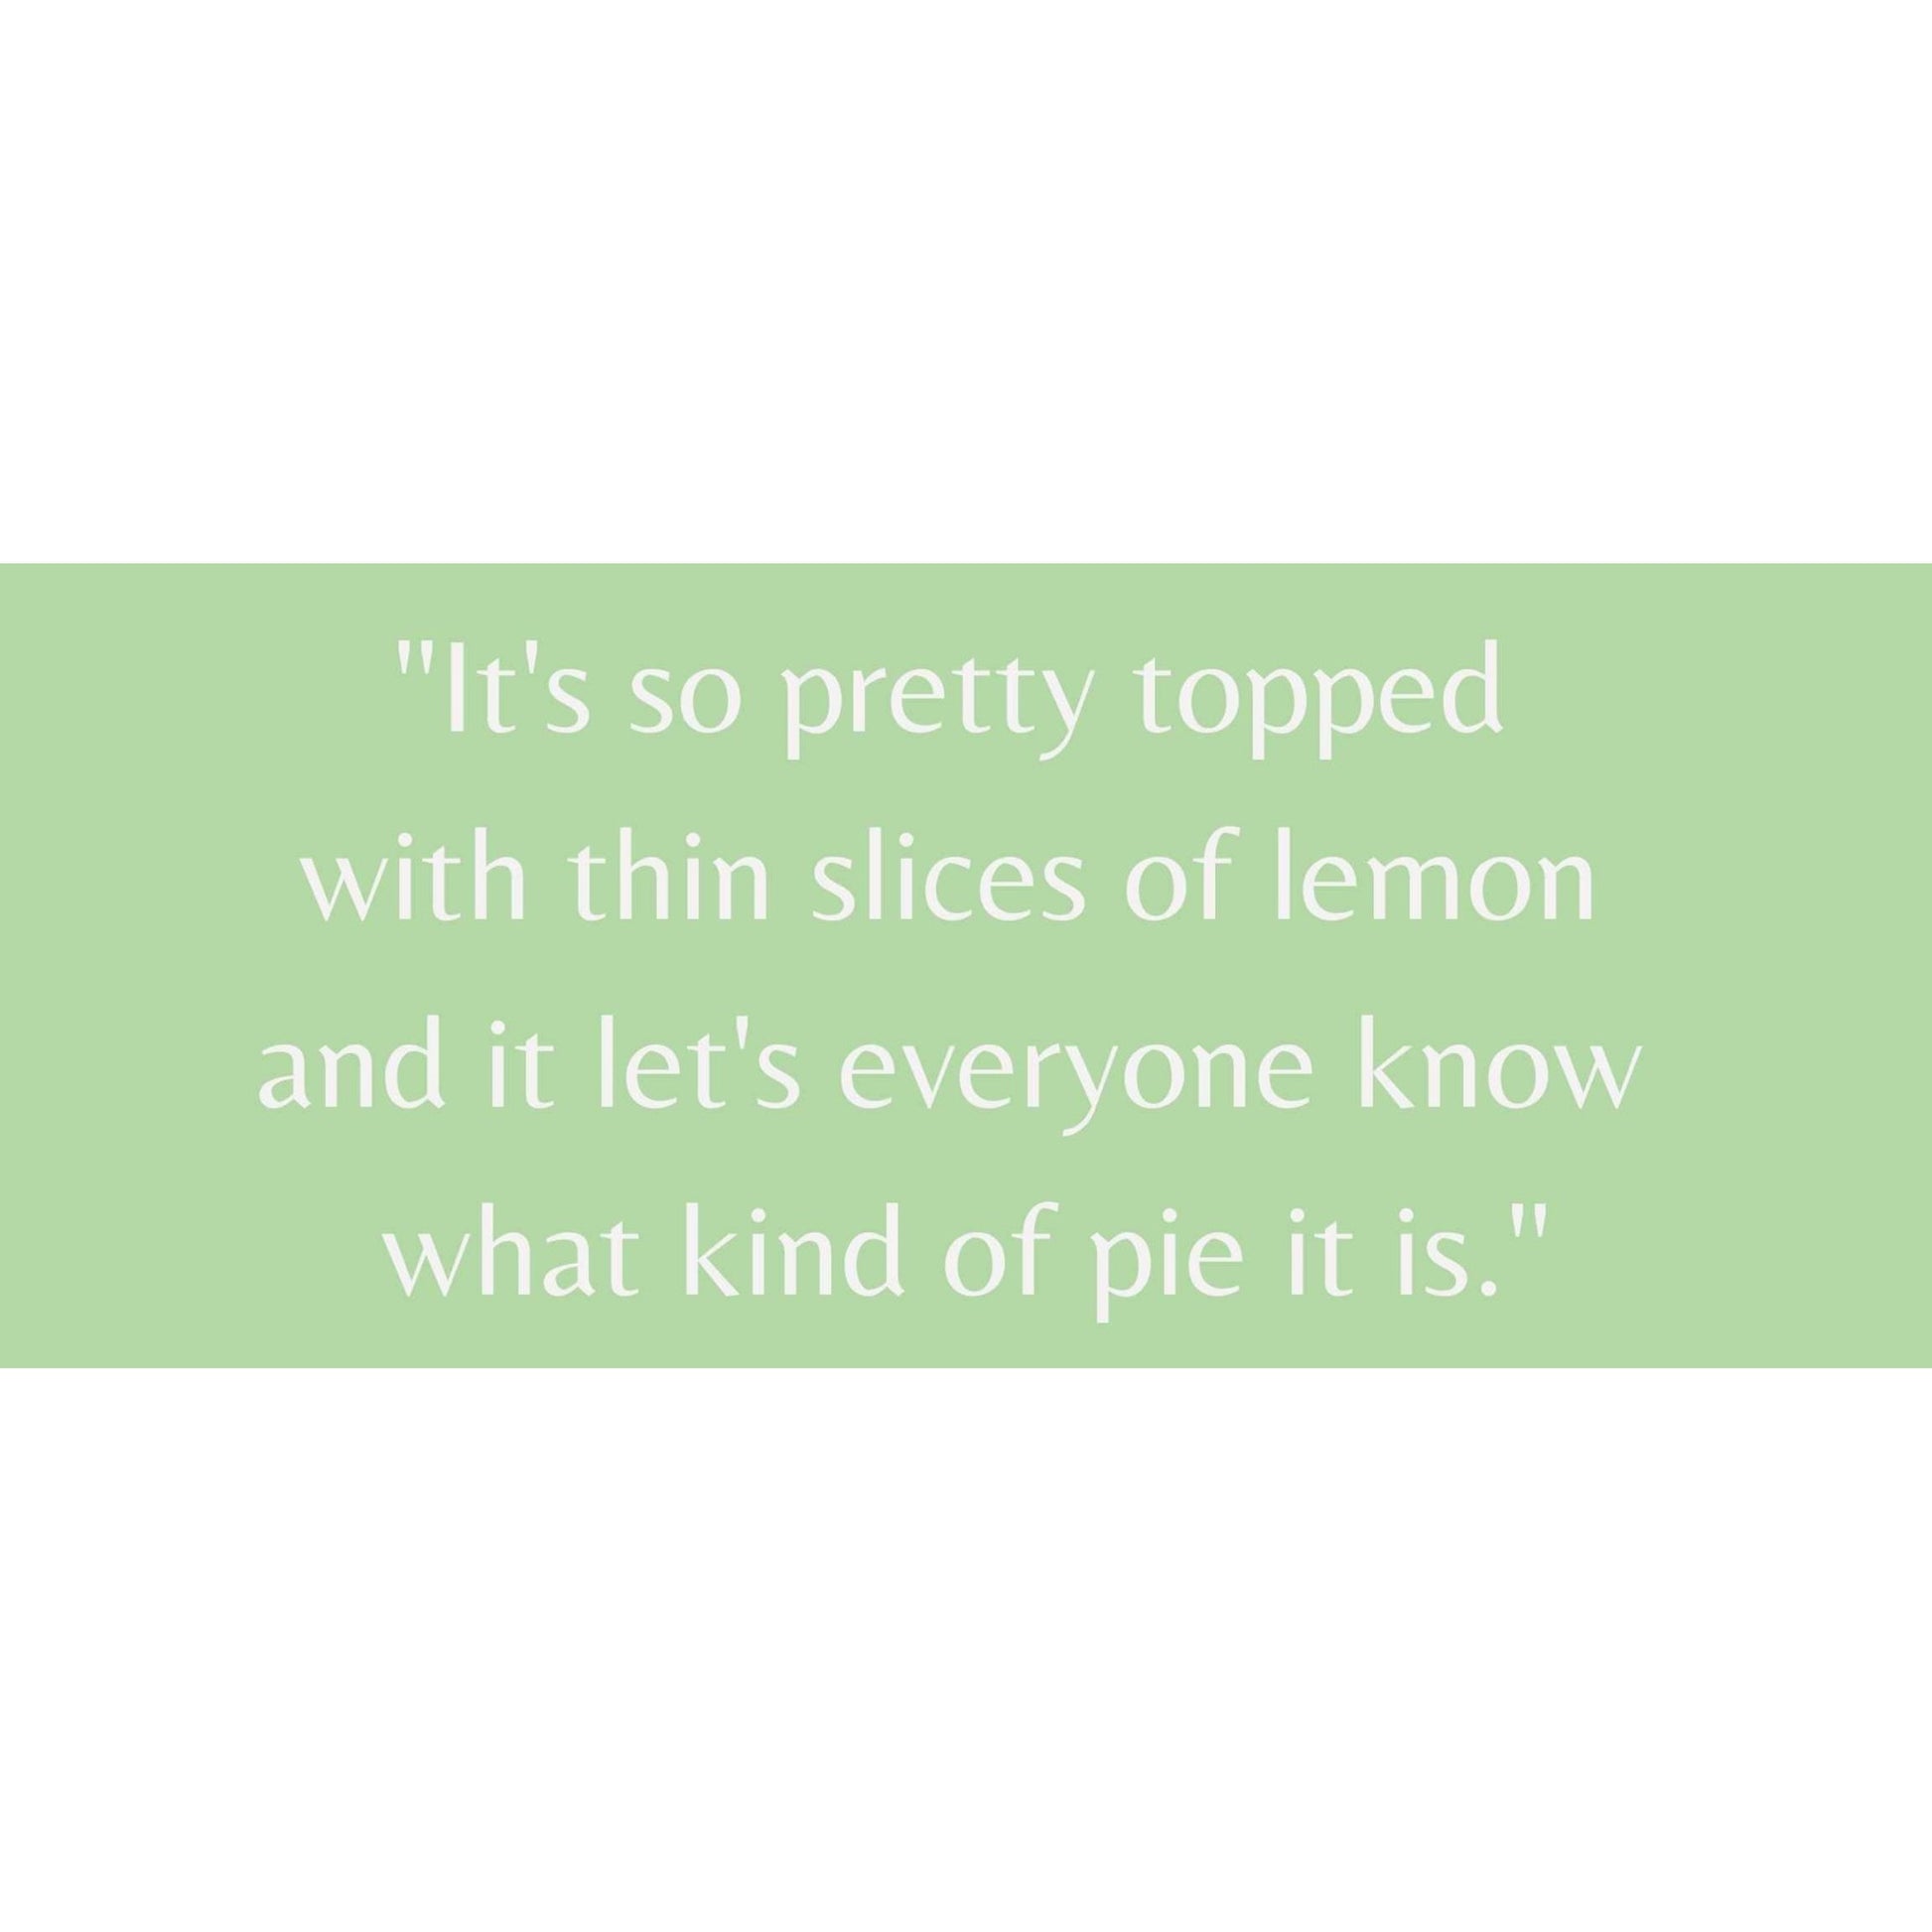 No Bake Lemon Pie with Quick Pie and Dip recipe included - Kitcheneez Mixes & More!